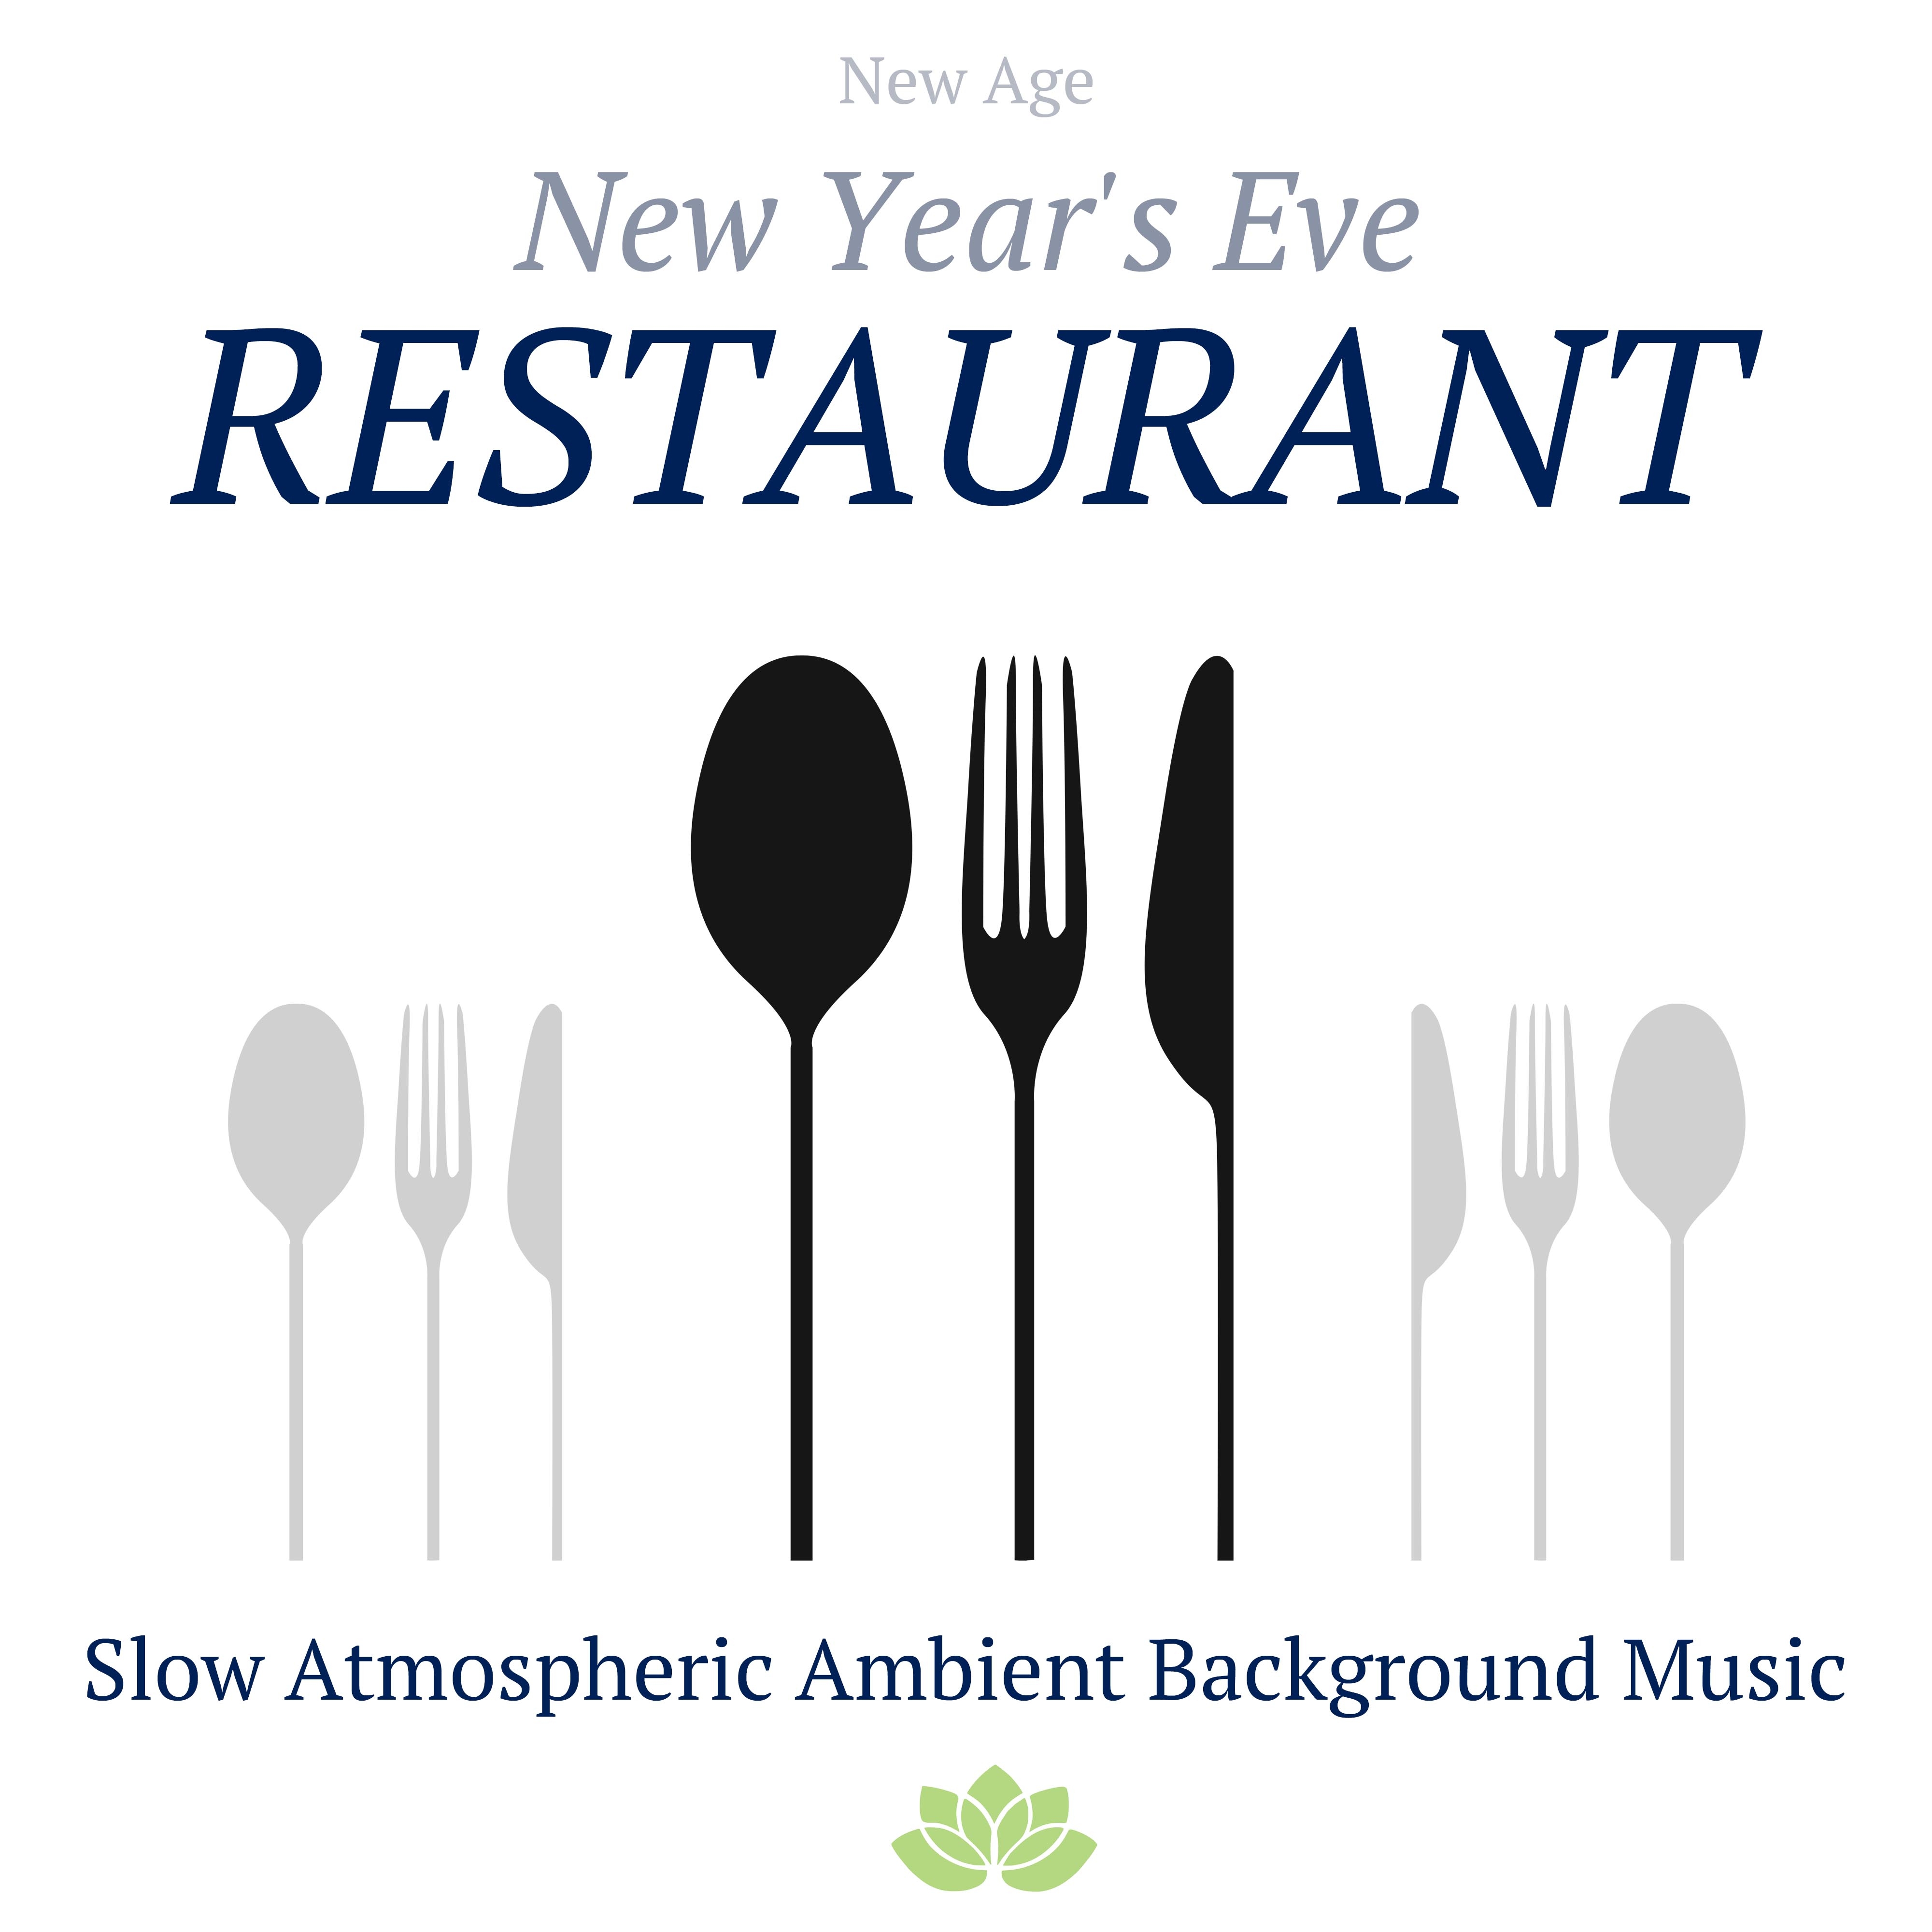 New Year's Eve Restaurant: Slow Atmospheric Ambient Background Music for Restaurants with Relaxing Piano Music and Nature Sounds